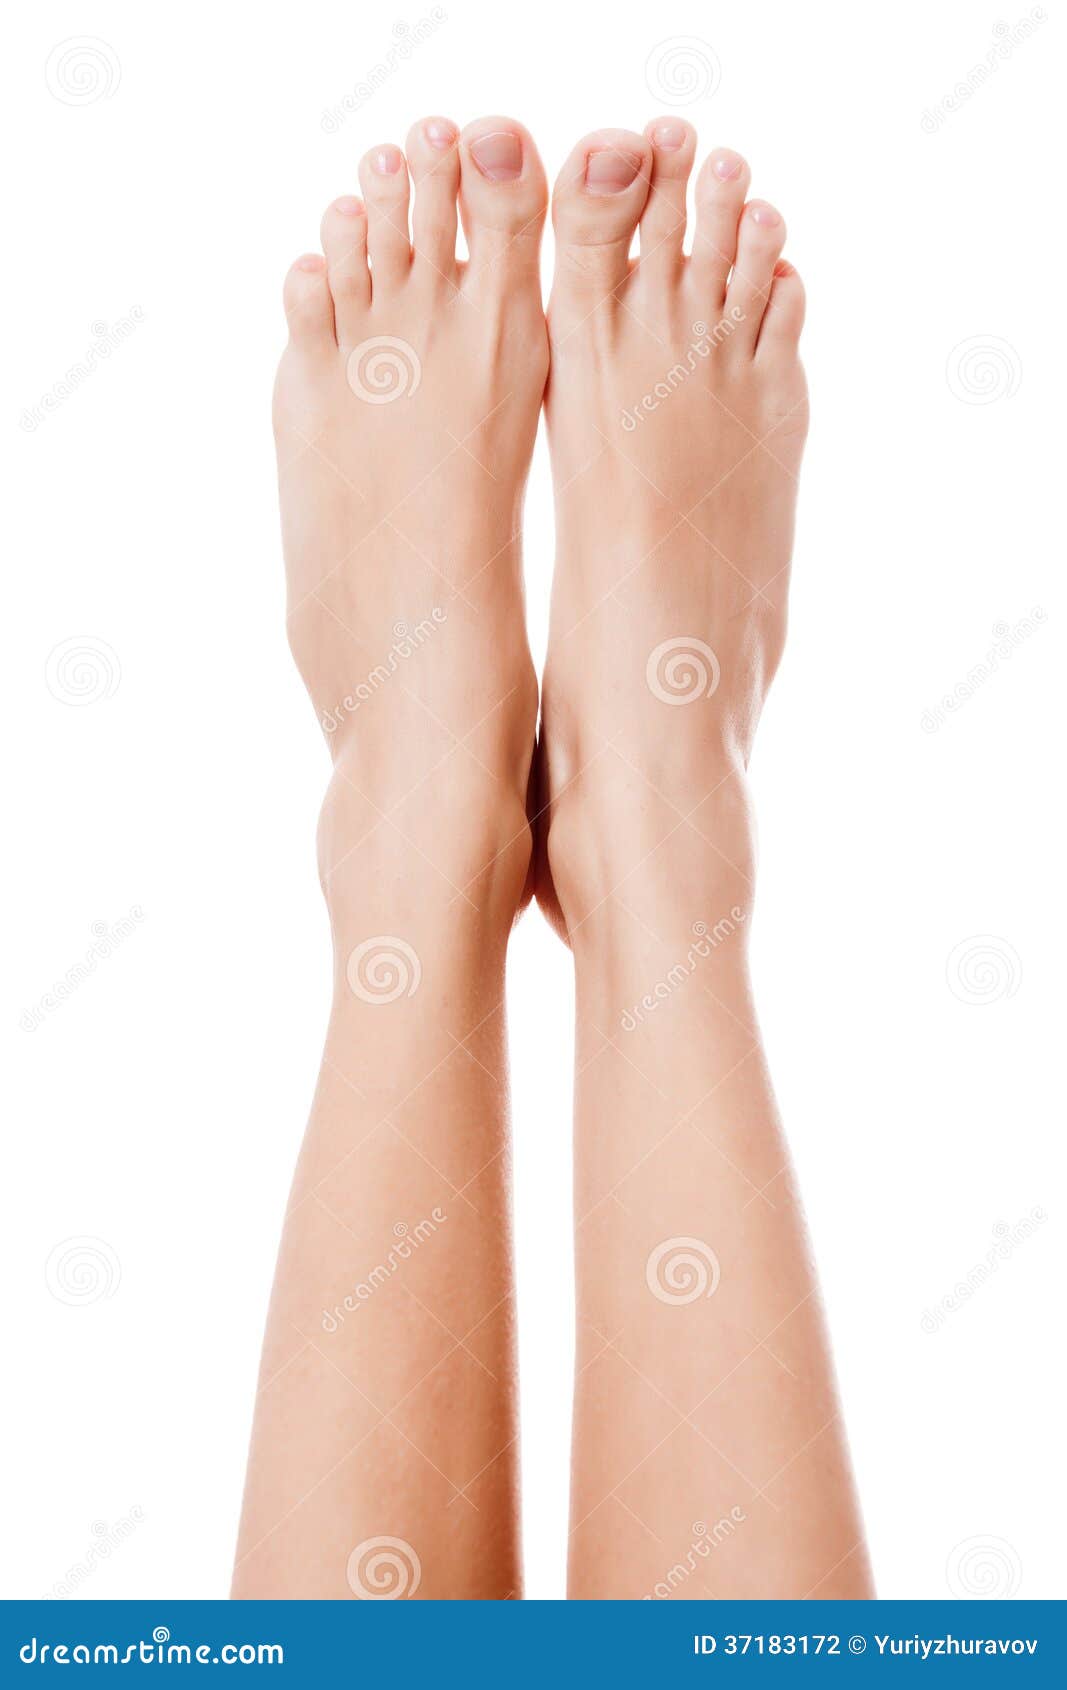 https://thumbs.dreamstime.com/z/close-up-image-woman-bare-feet-isolated-white-background-37183172.jpg